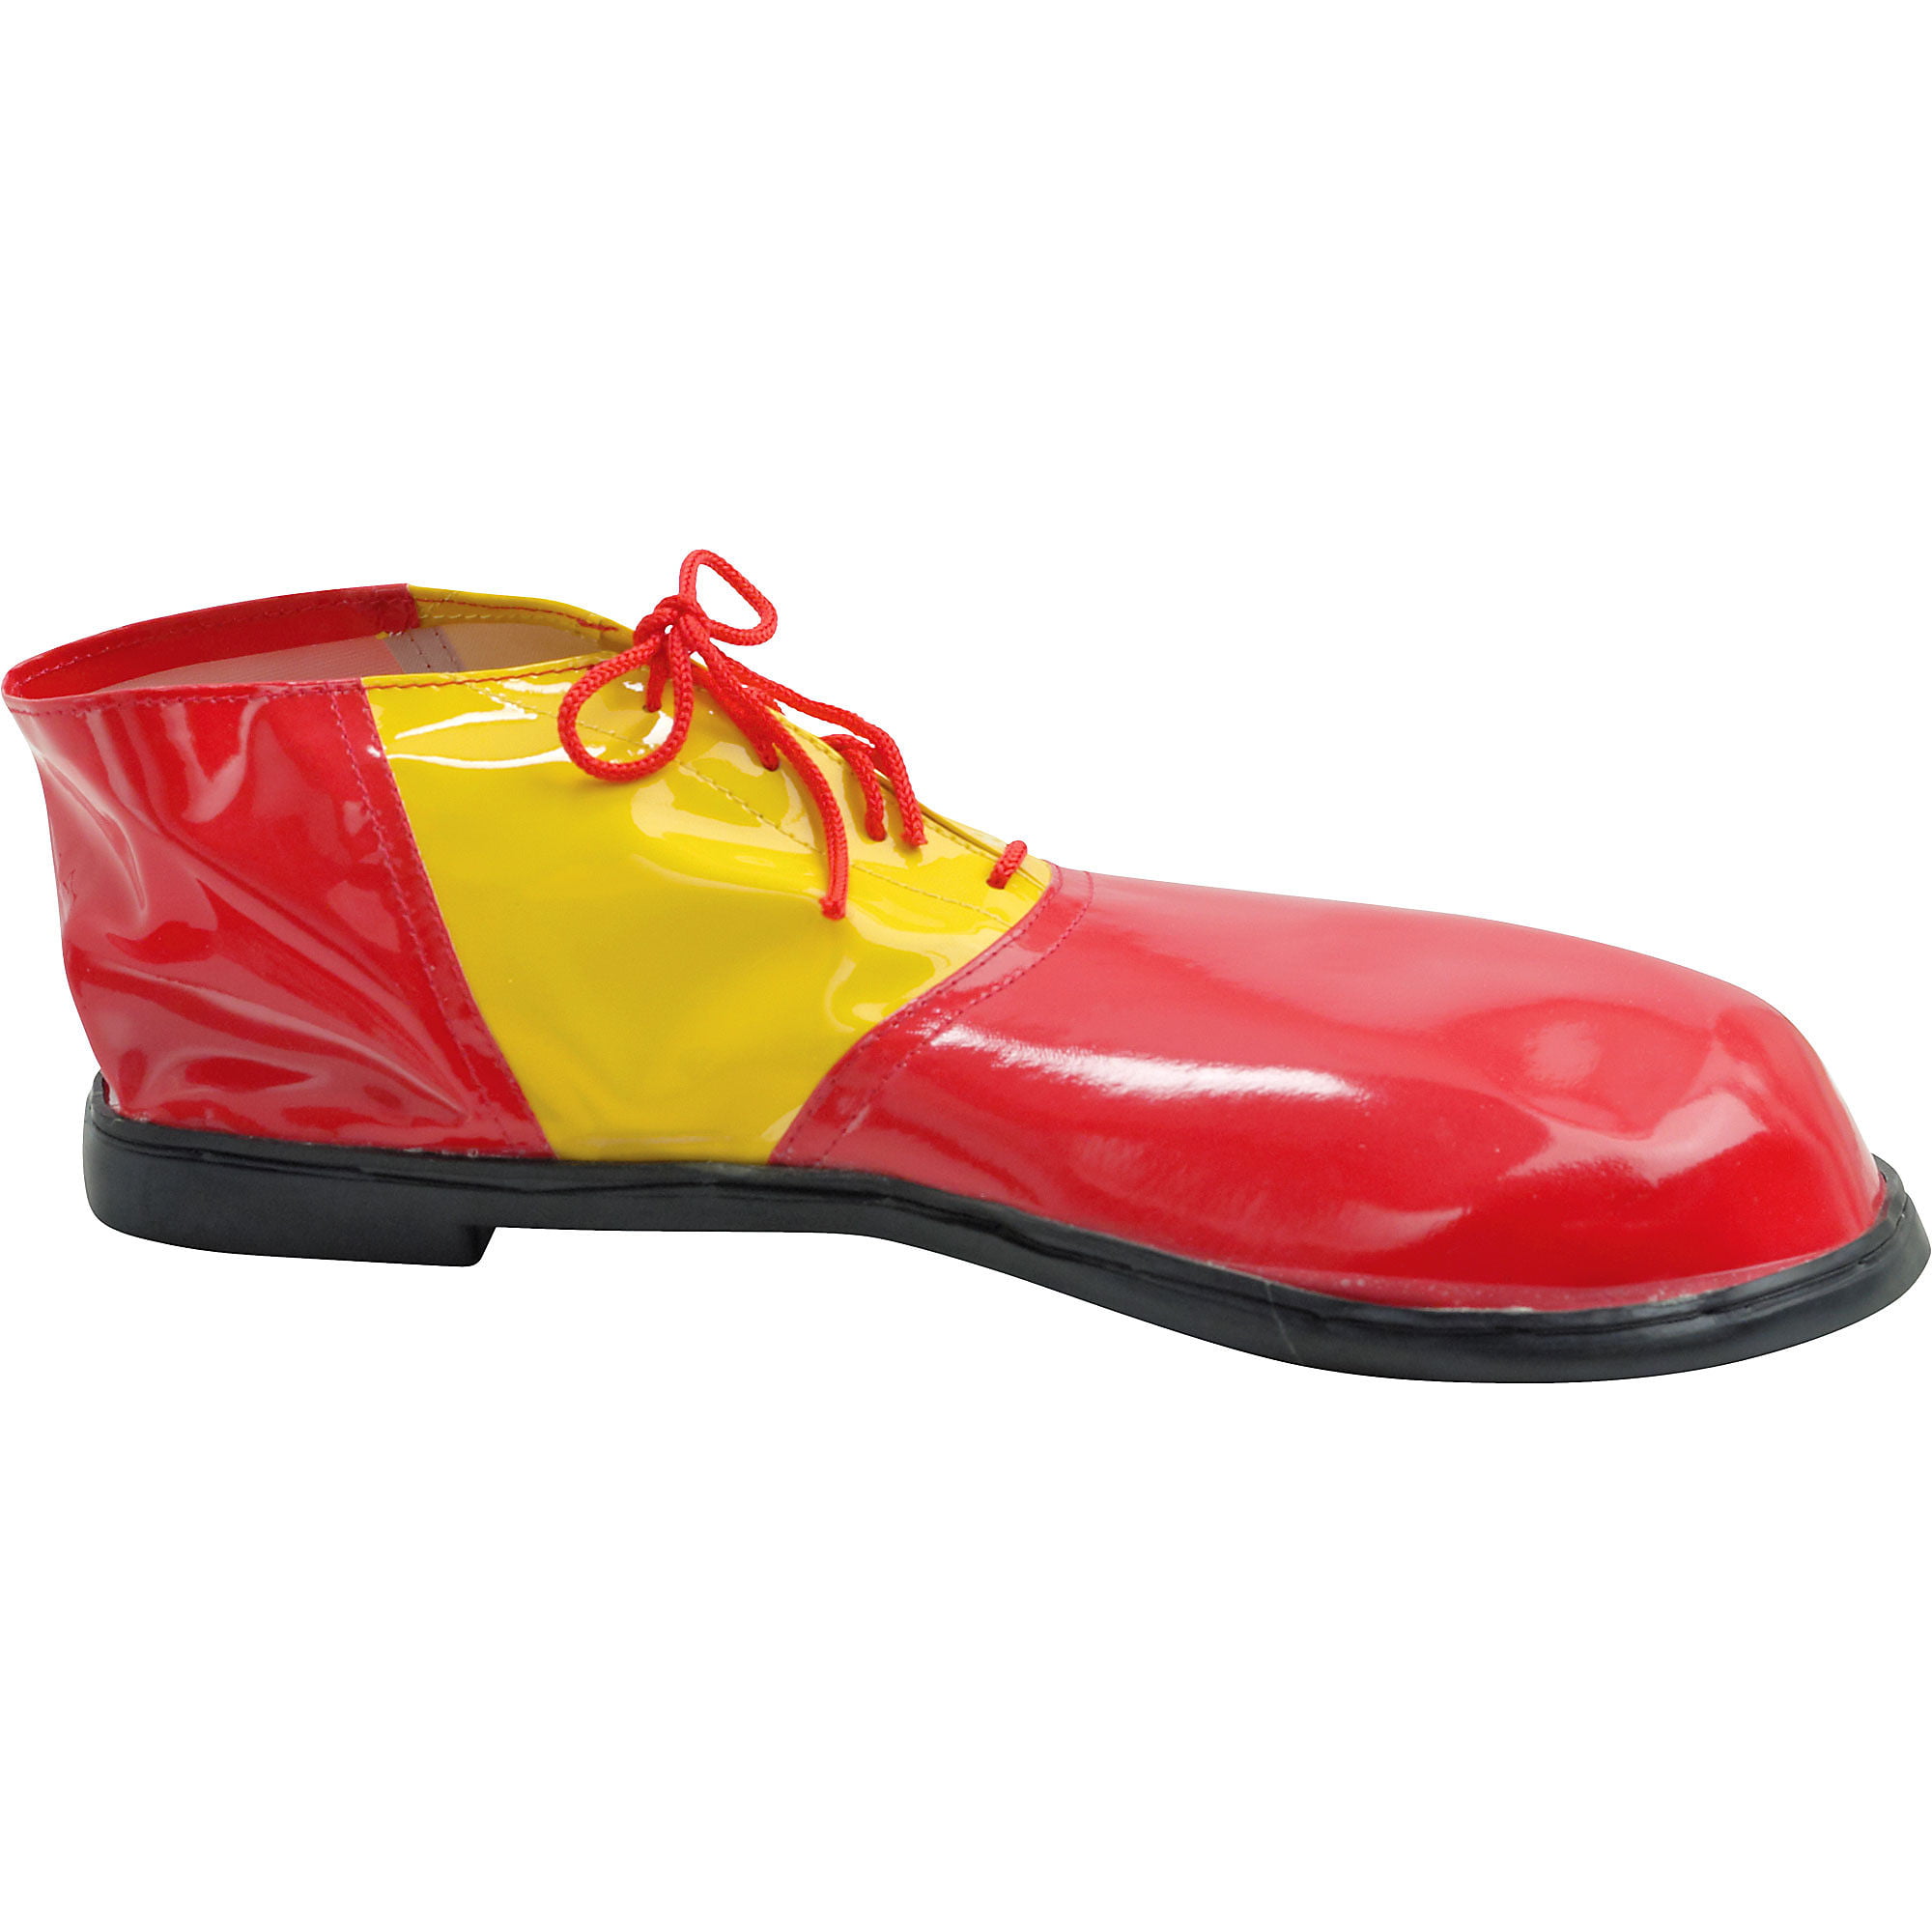 Lounge person Bee Clown Shoes Adult Costume Shoes - Walmart.com